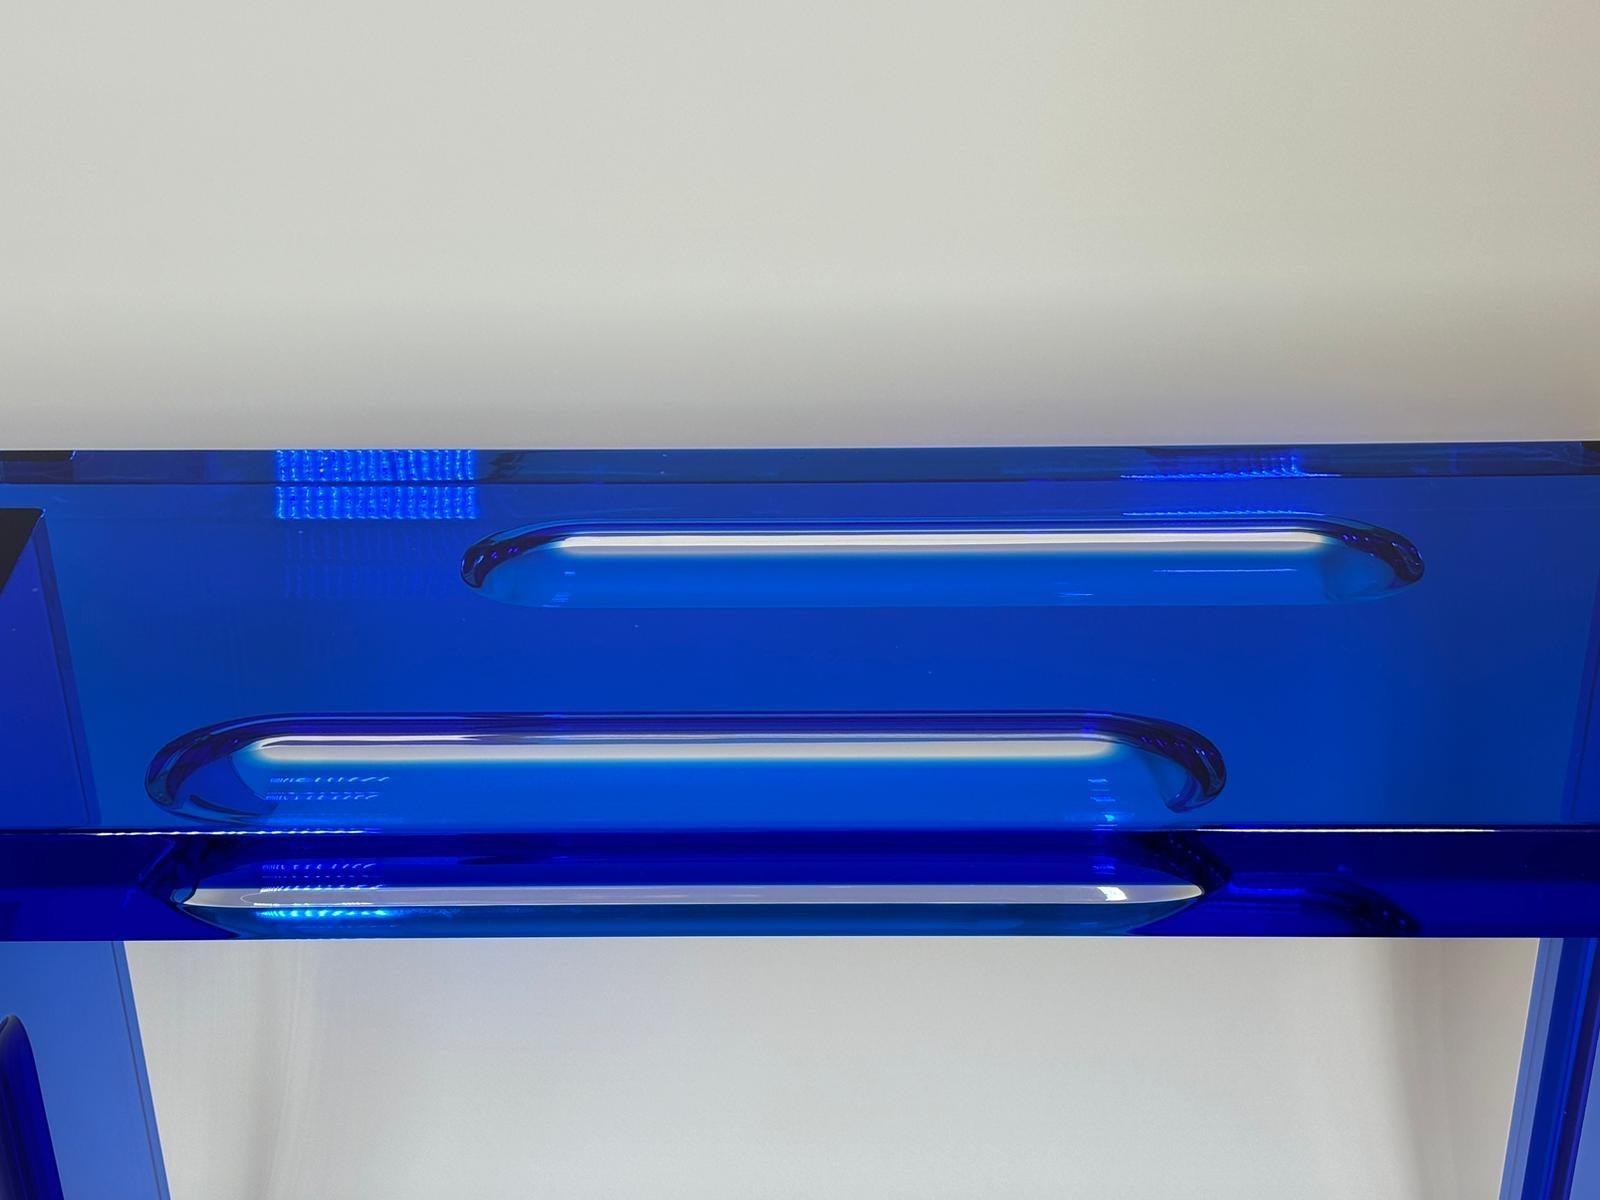 Console Deep Blue model in blue plexiglass designed by Studio Superego for Superego Editions.

Biography
Superego editions was born in 2006, performing a constant activity of research in decorative arts by offering both contemporary and vintage